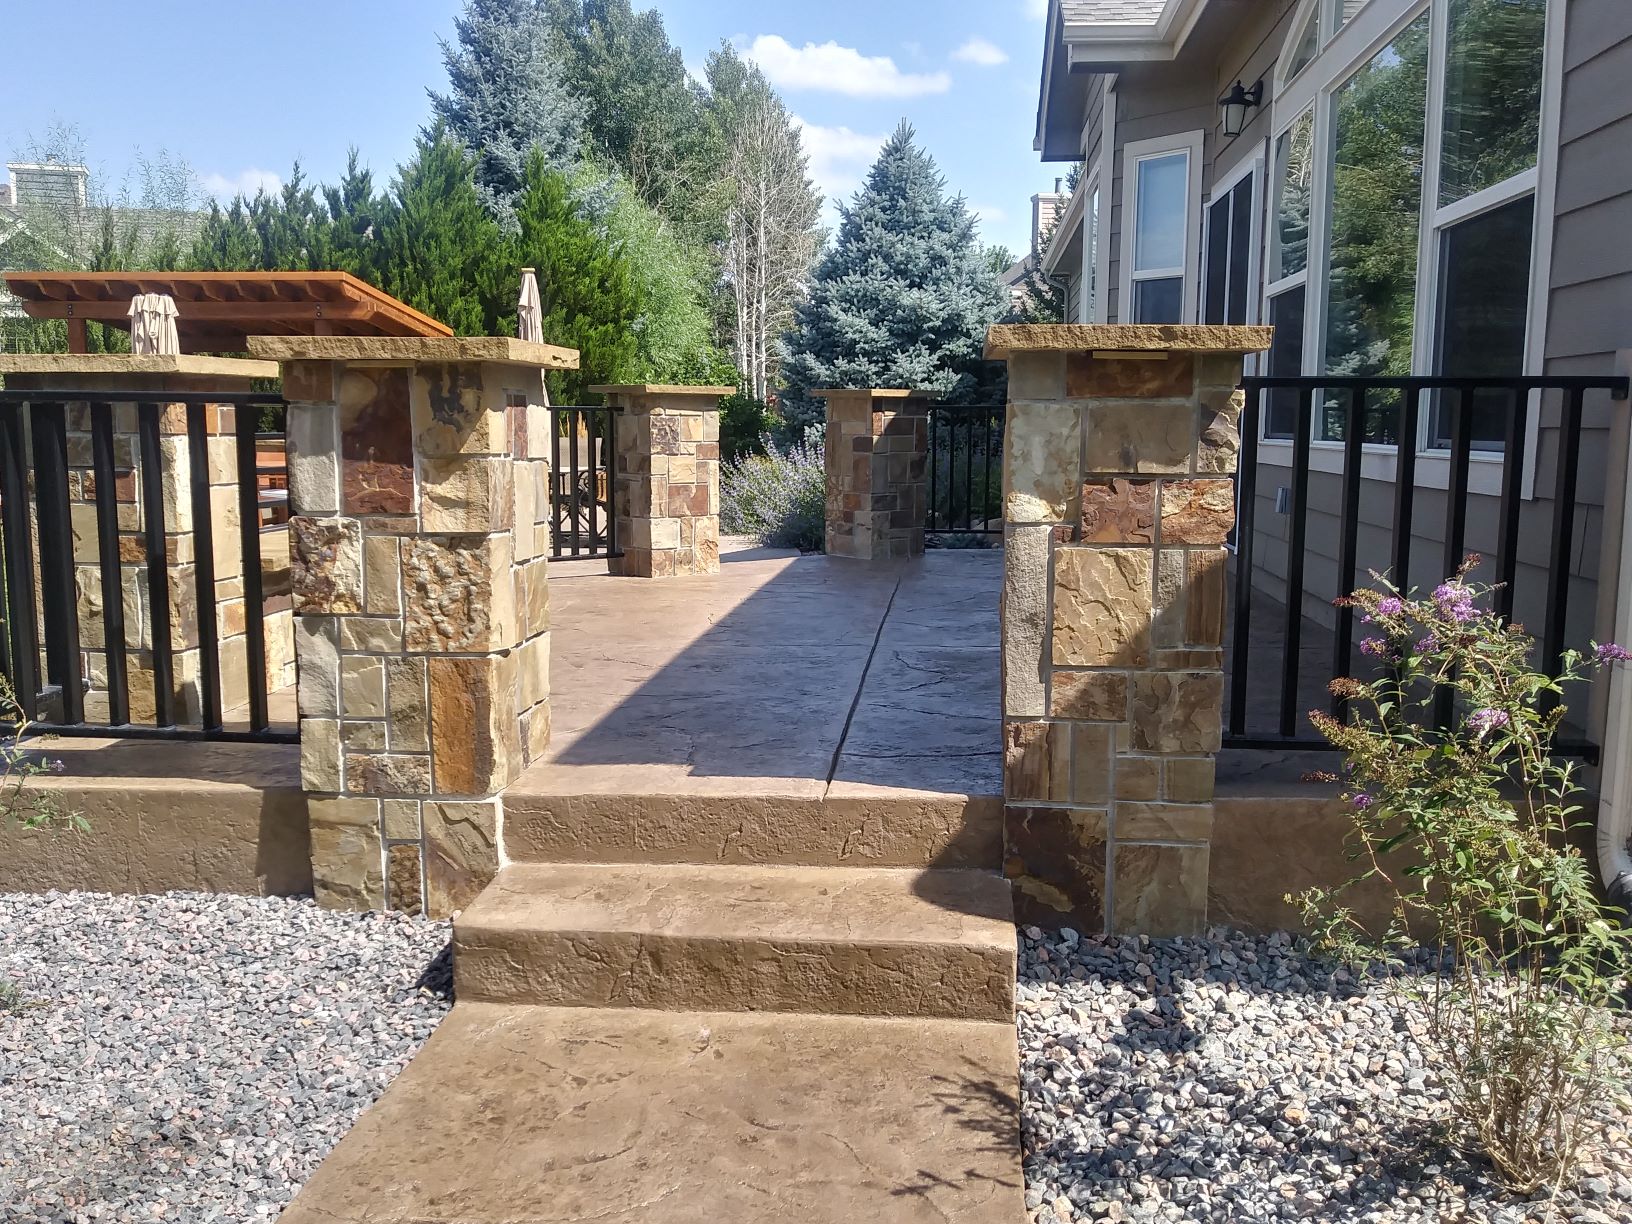 Printed concrete patio with stone pillars and concrete path surrounded by rocks.